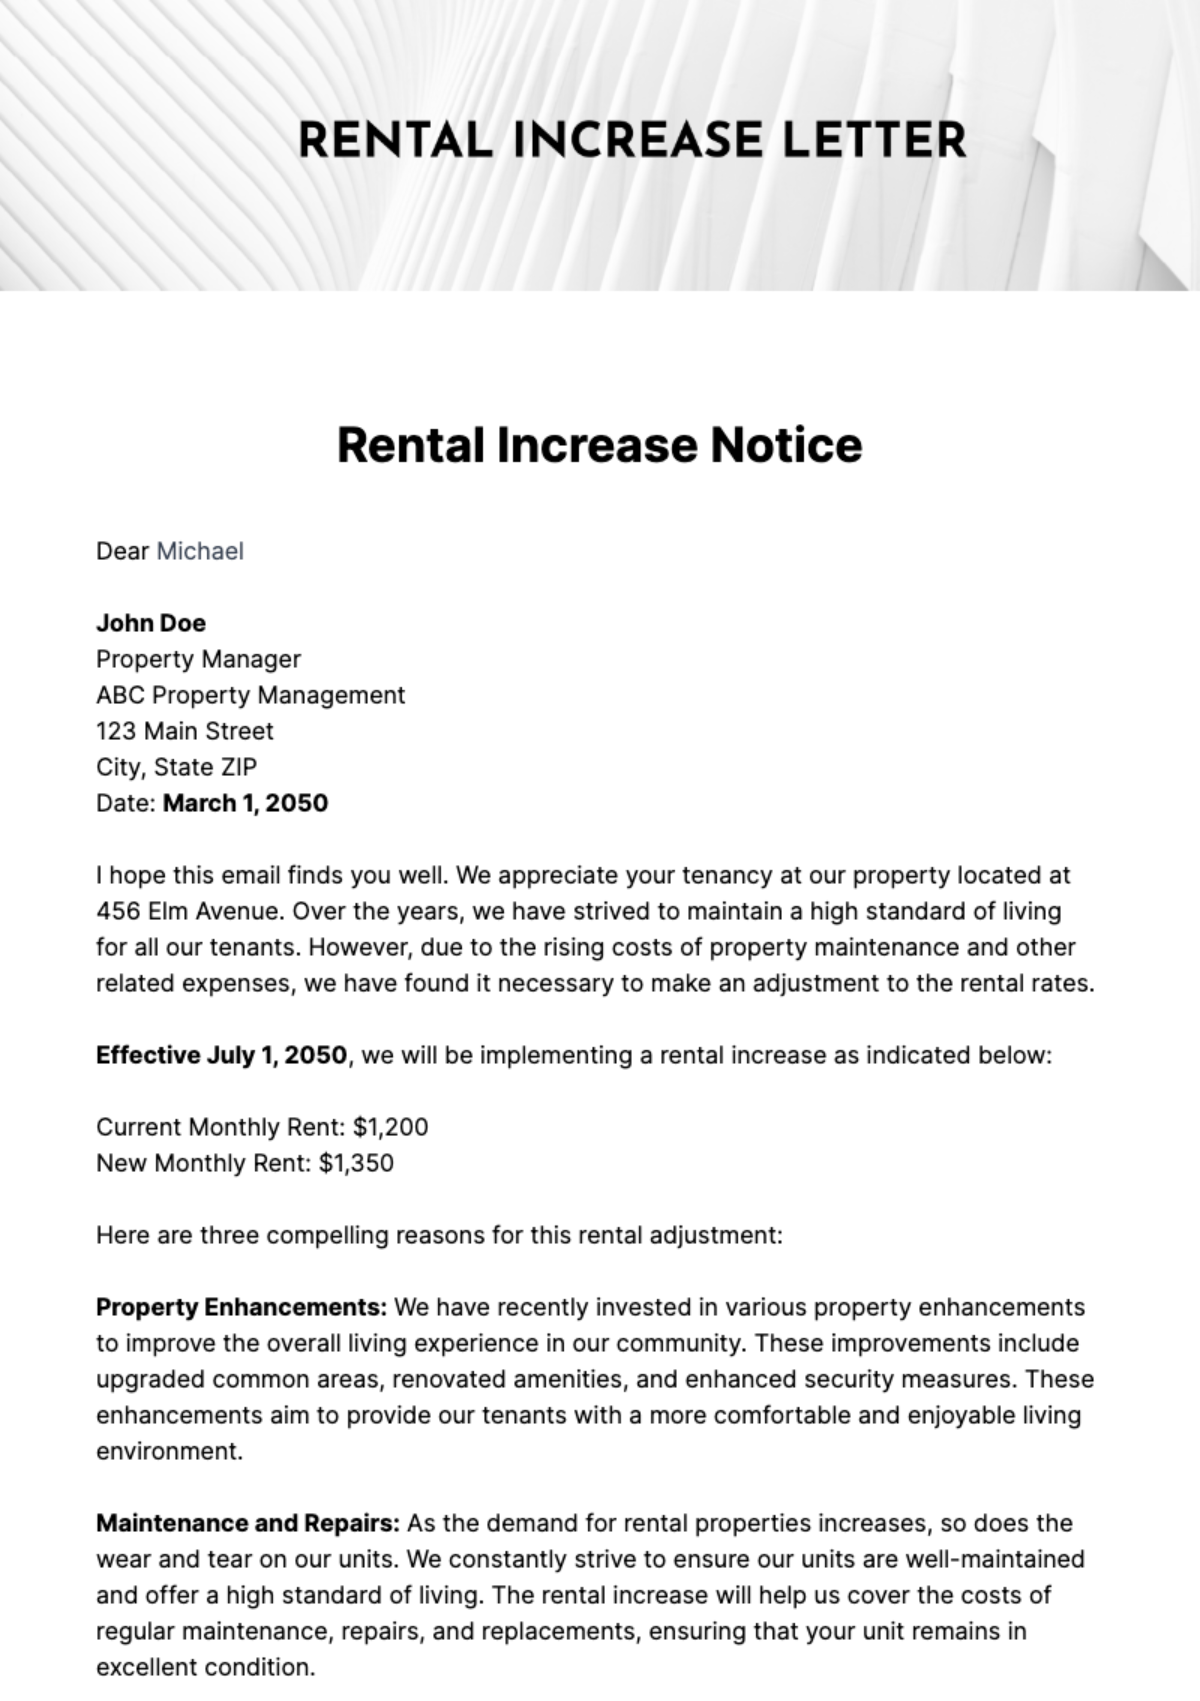 Free Rental Increase Letter Template